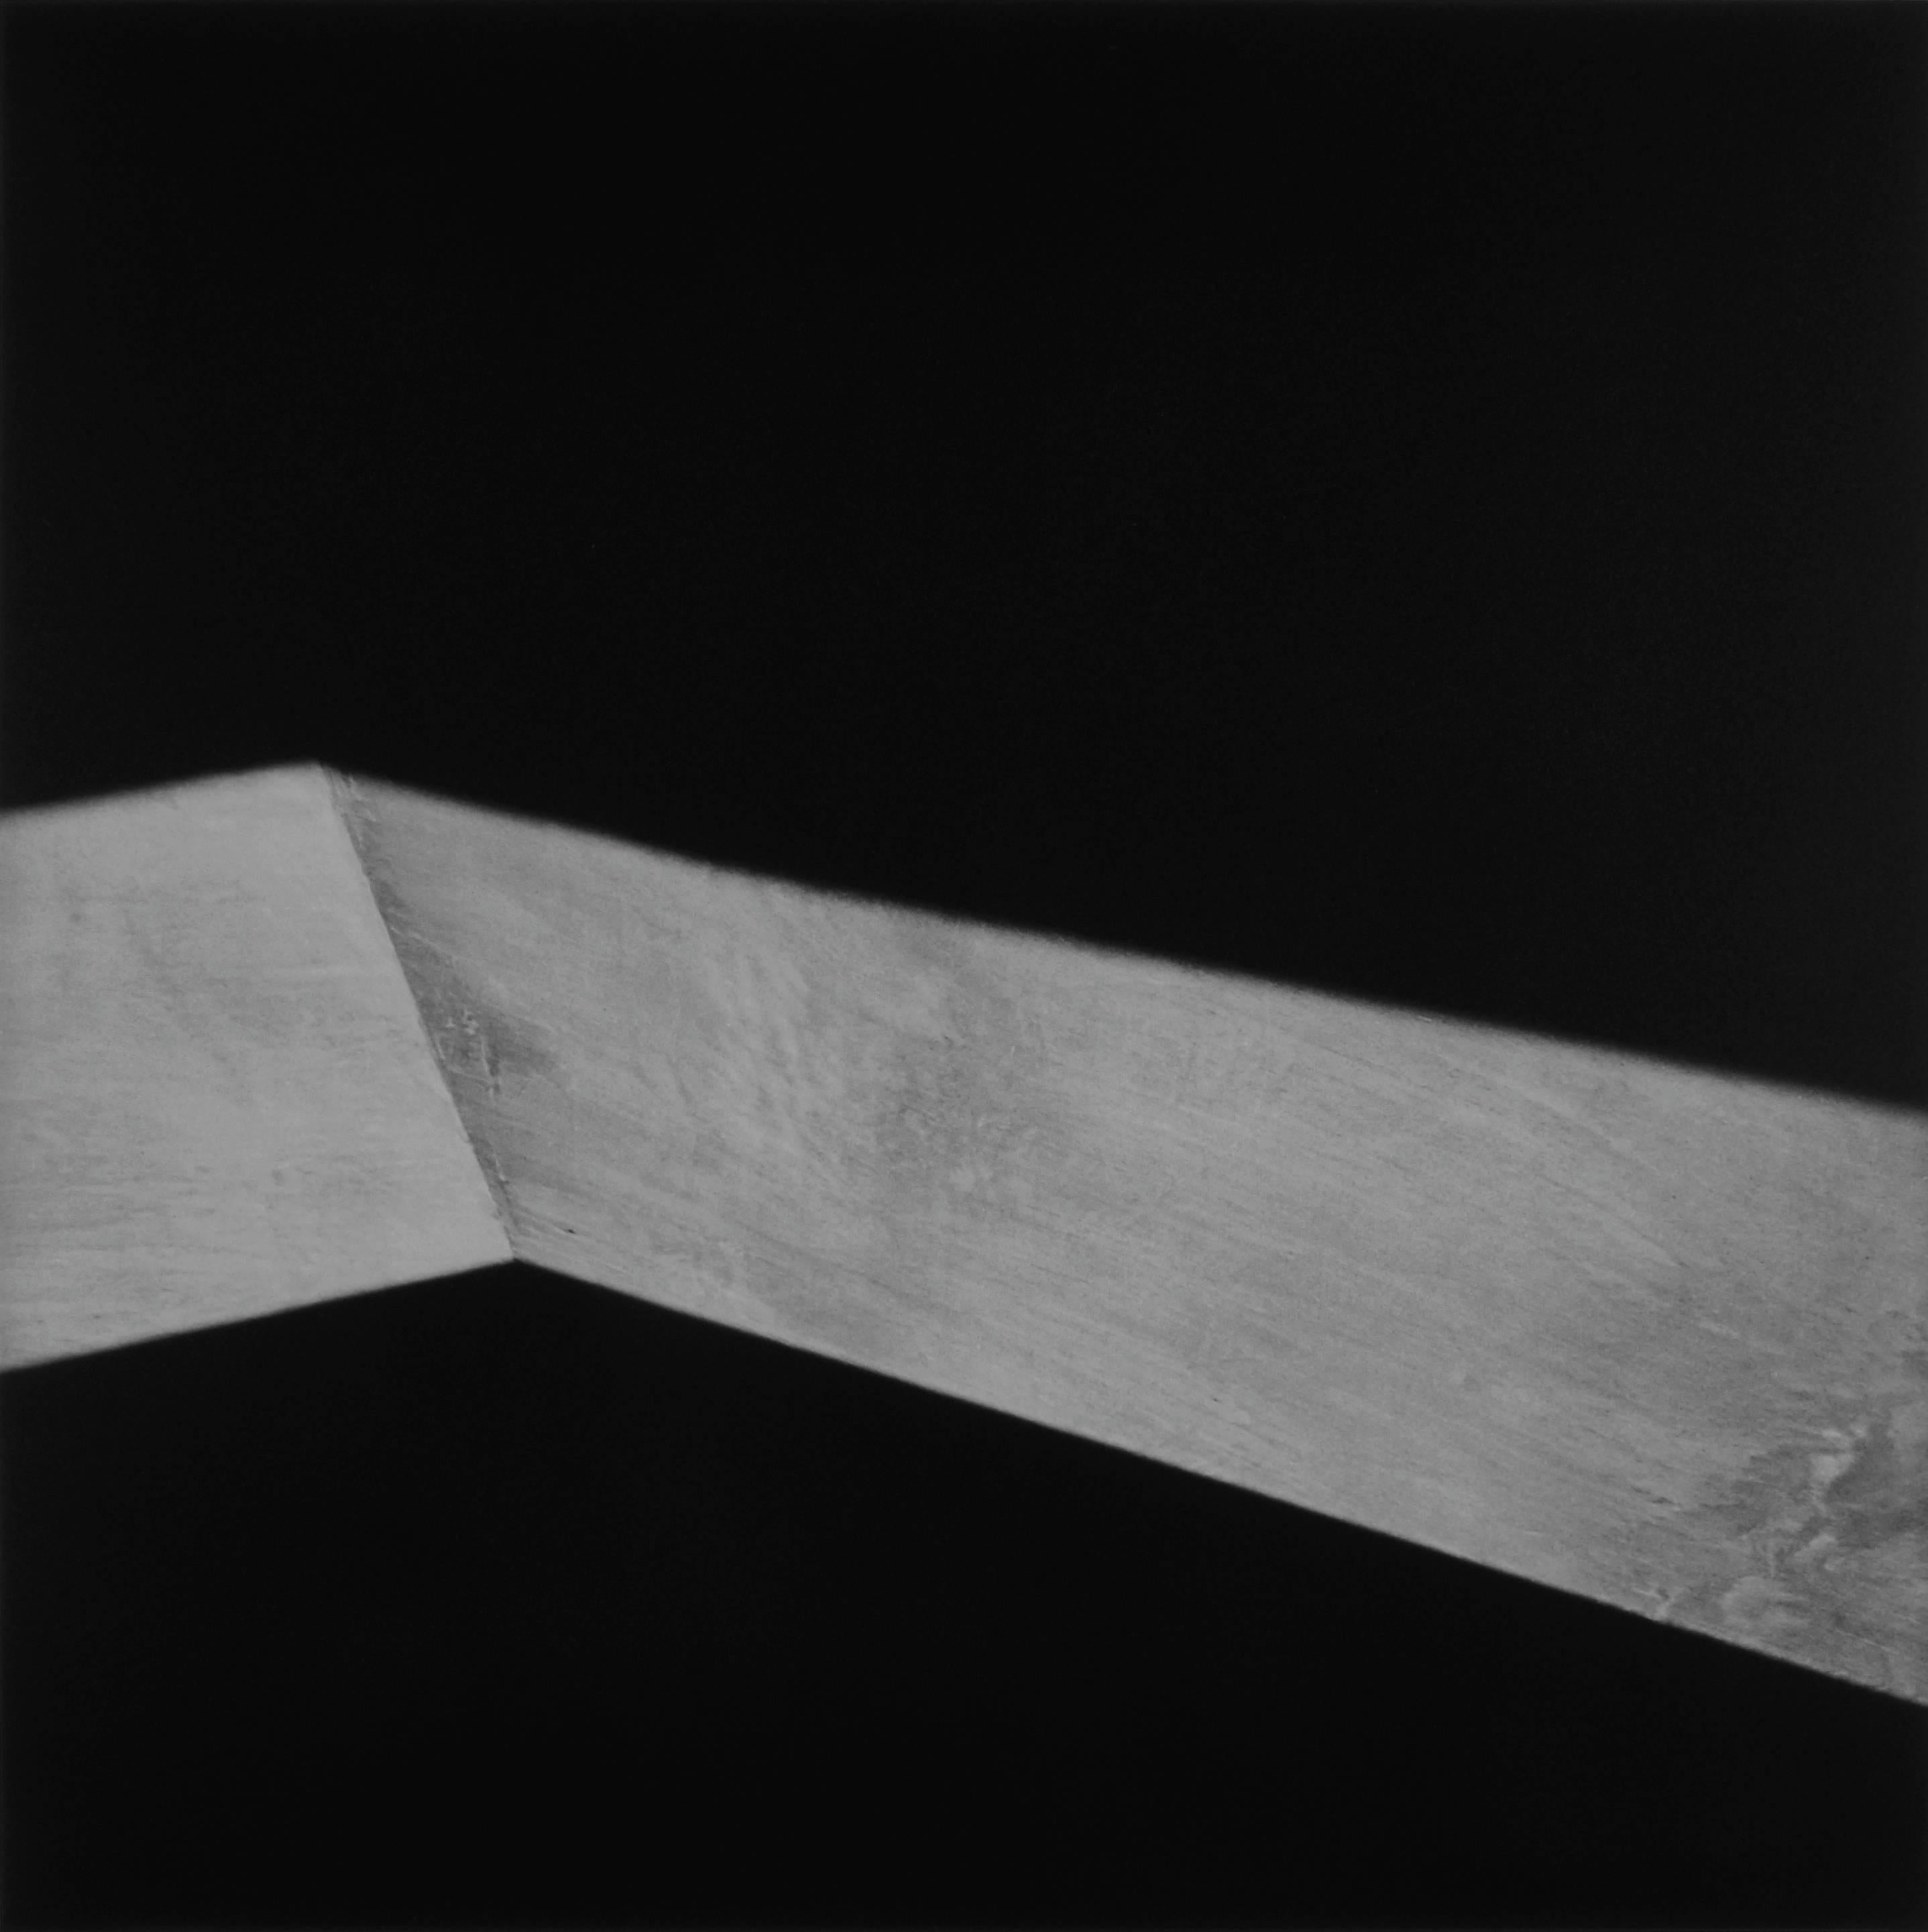 Grant Frost, &quot;Untitled 8&quot;, Palladium print, 19&quot; x 19&quot; 
Framed in a simple black frame. Framed dimensions are 21&quot; x 21&quot;.  

Grant Frost's minimalist black and white photography focuses on abstract form. This series of